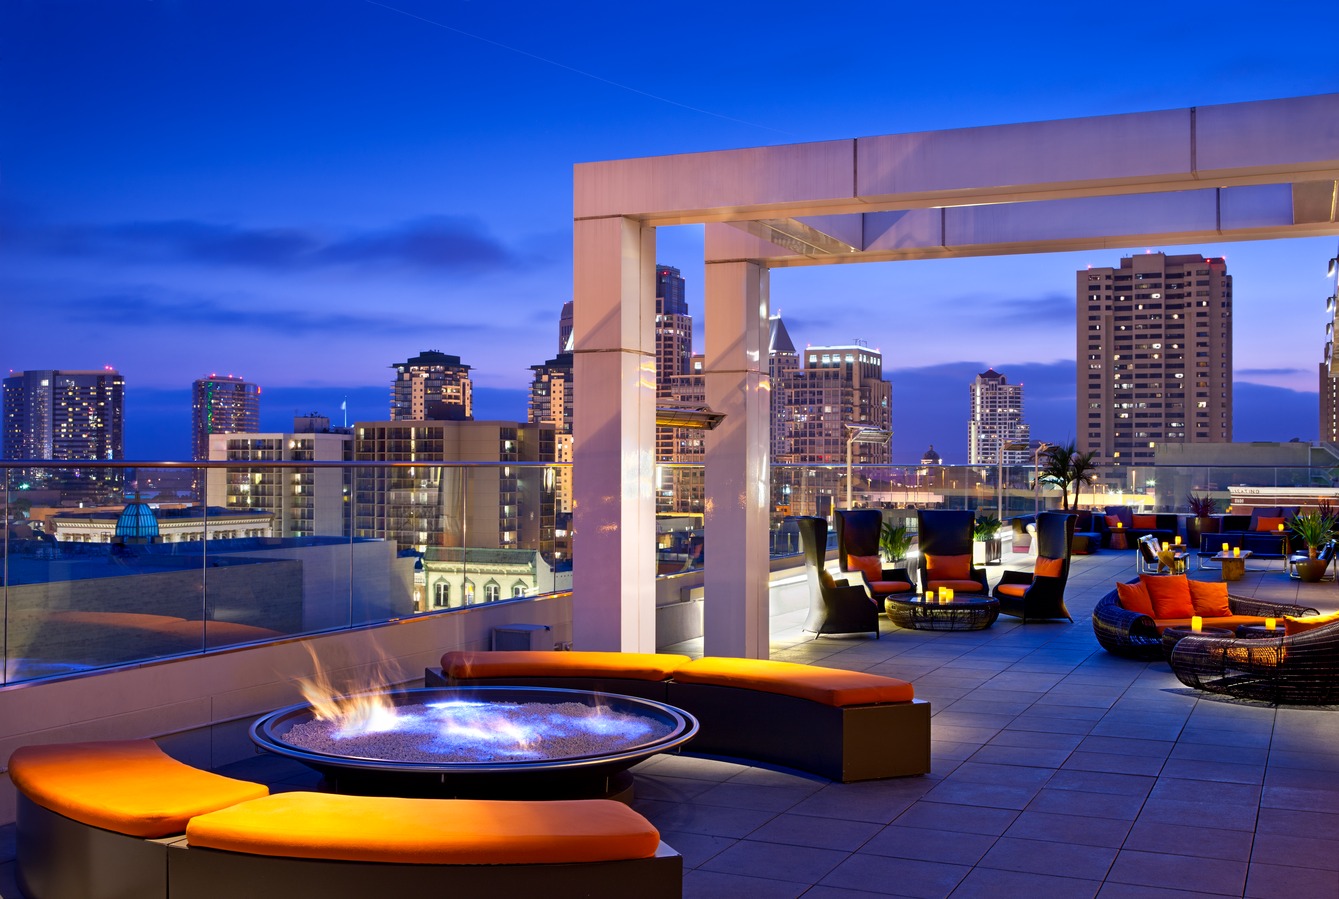 HOTELS AVAILABLE TODAY IN SAN DIEGO - ITS SO SAN DIEGO